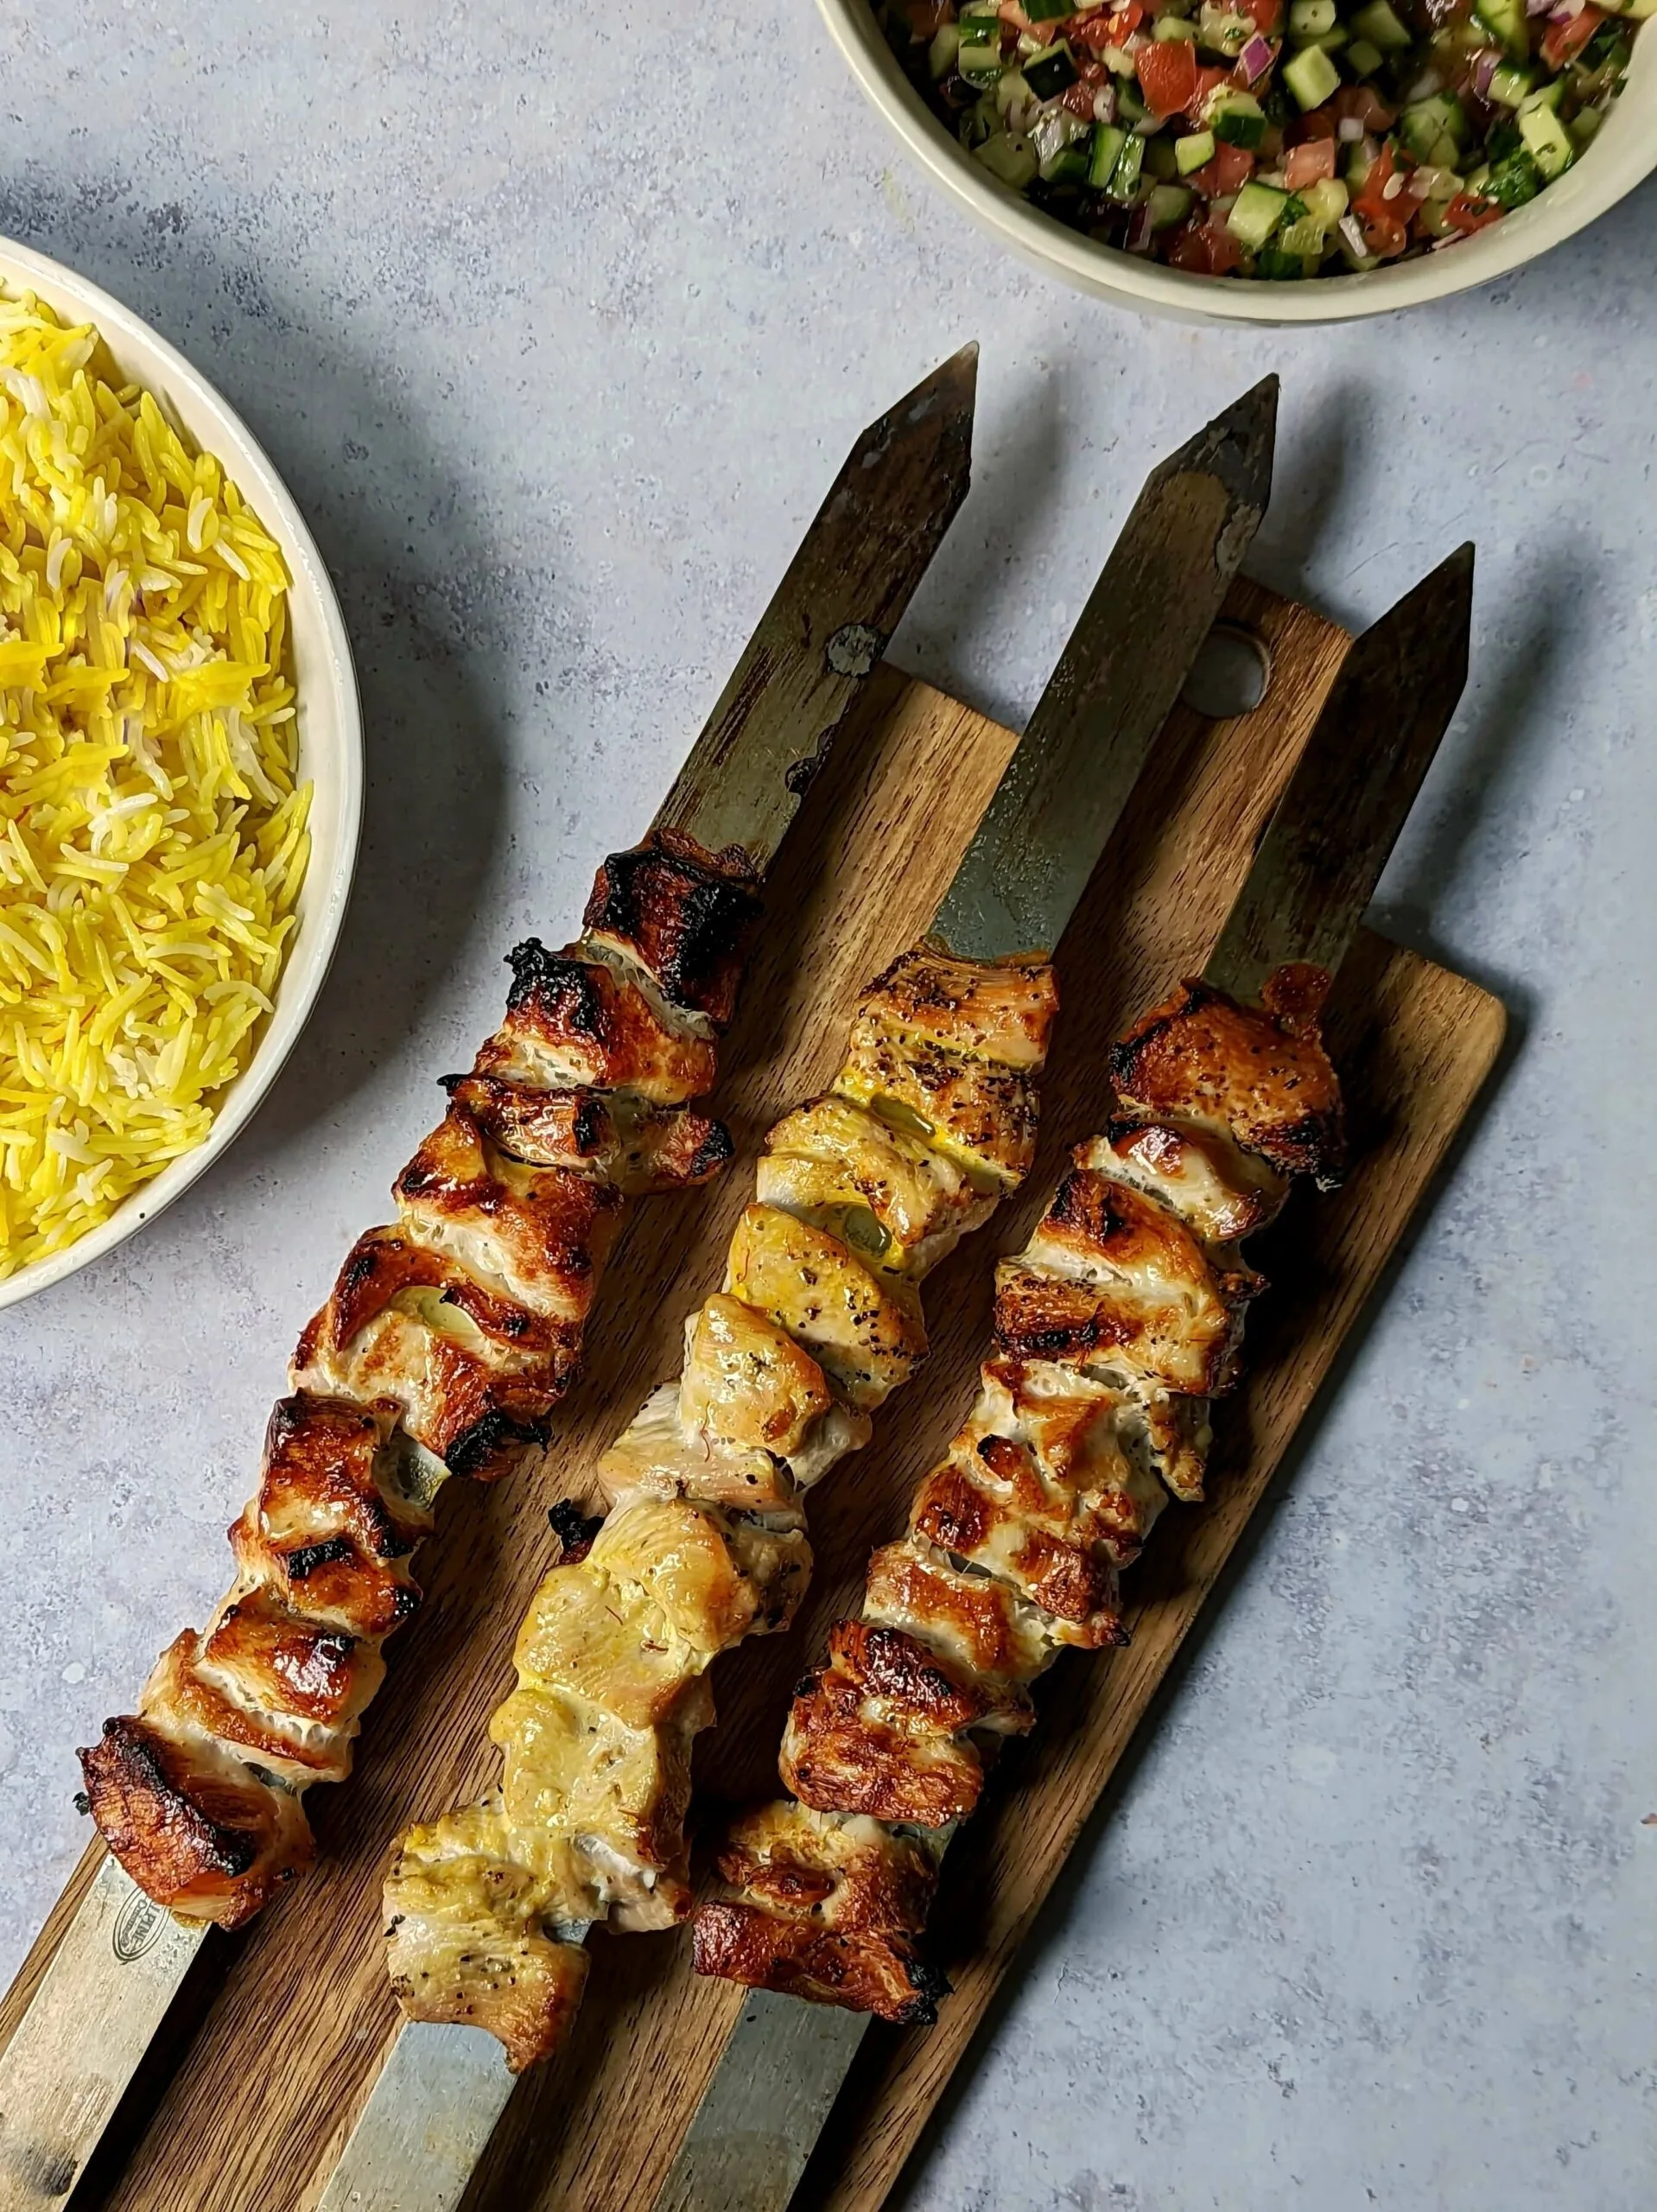 Joojeh kabobs served with saffron rice.